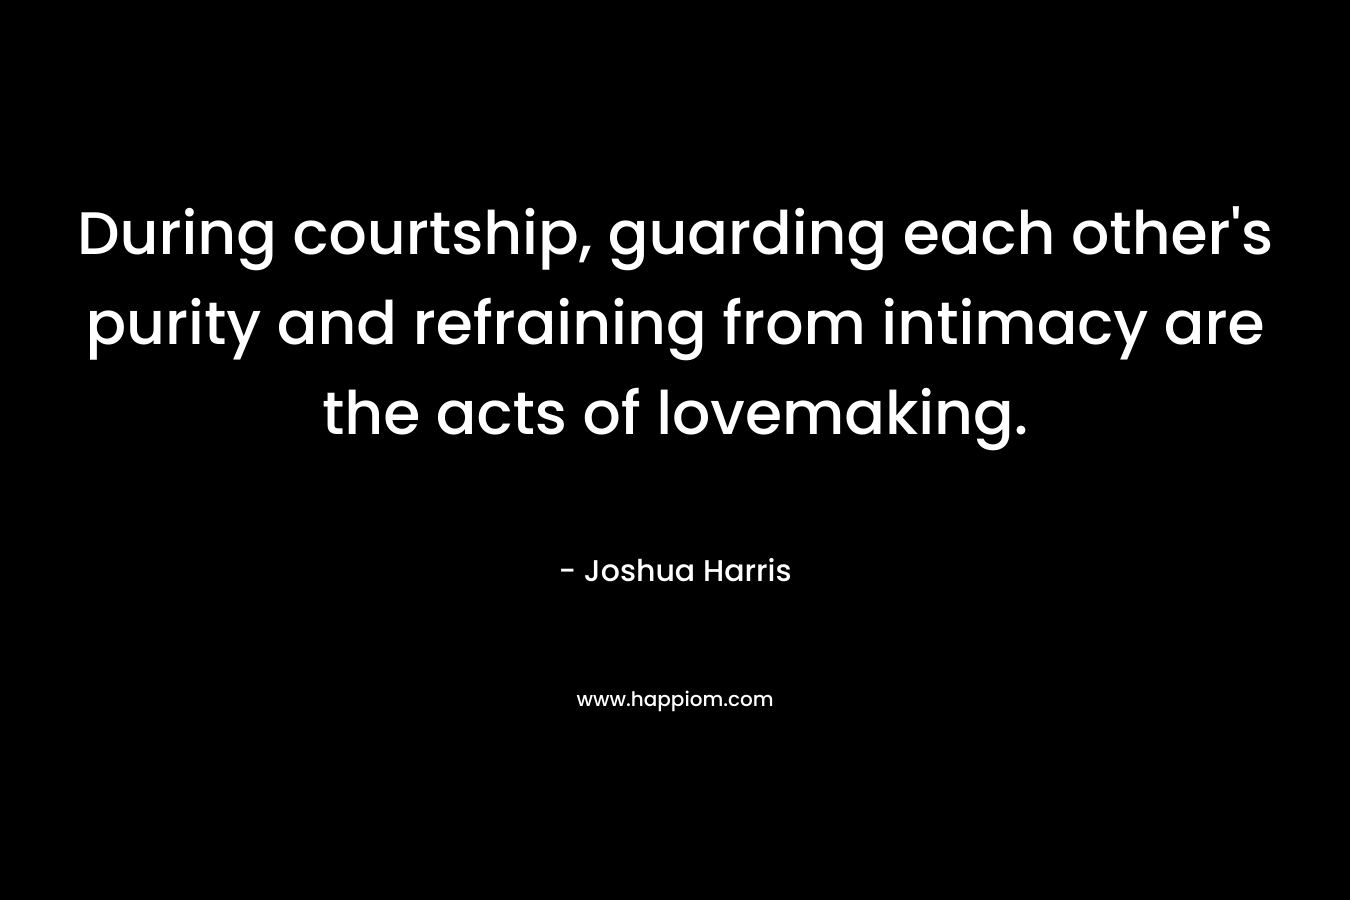 During courtship, guarding each other’s purity and refraining from intimacy are the acts of lovemaking. – Joshua Harris